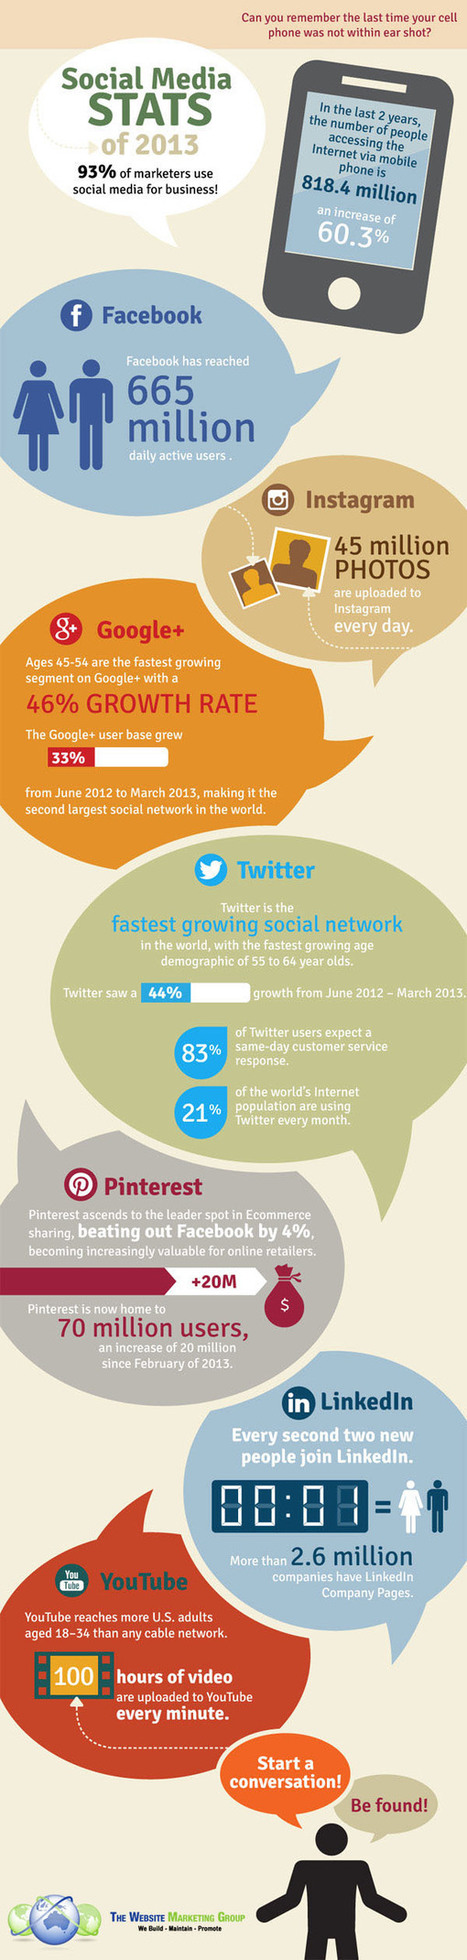 Social Media Infographic 2013 : Which platform is growing the fastest? | Better know and better use Social Media today (facebook, twitter...) | Scoop.it